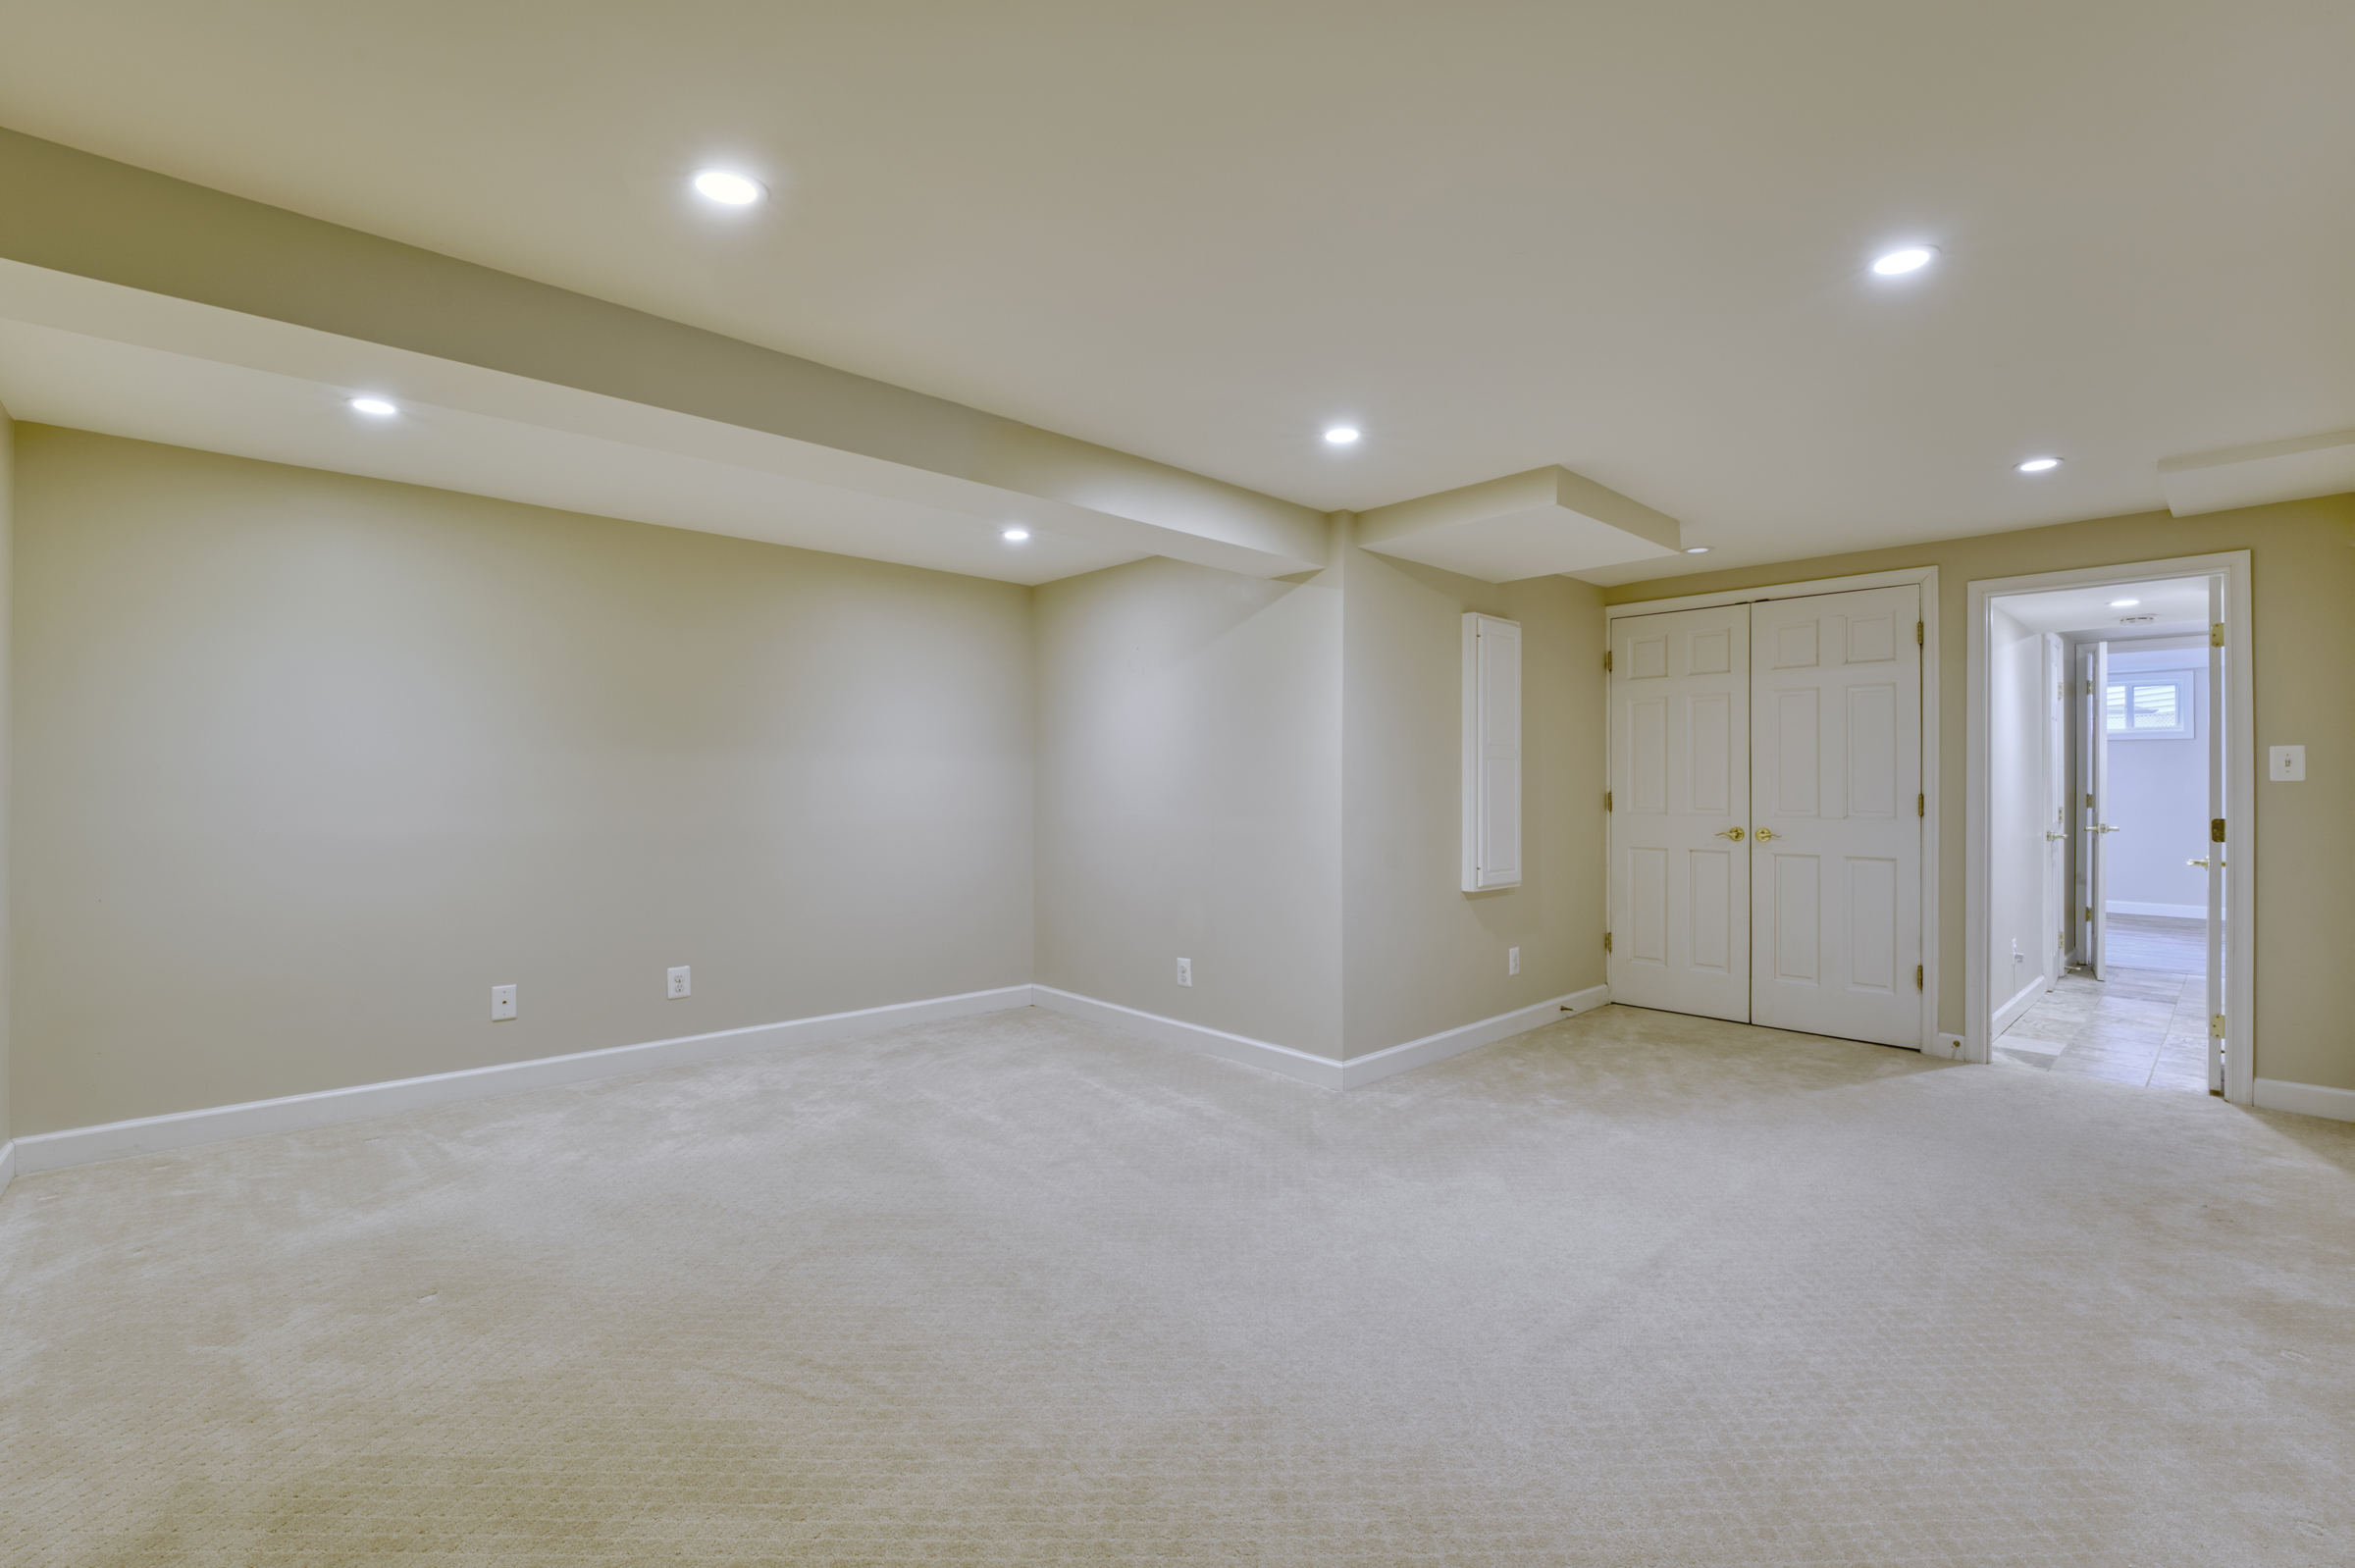 Professional interior photo of 2624 Depaul Dr in Vienna, VA - showing the main area in the fully finished basement with beige carpeting and looking back to a fully bathroom